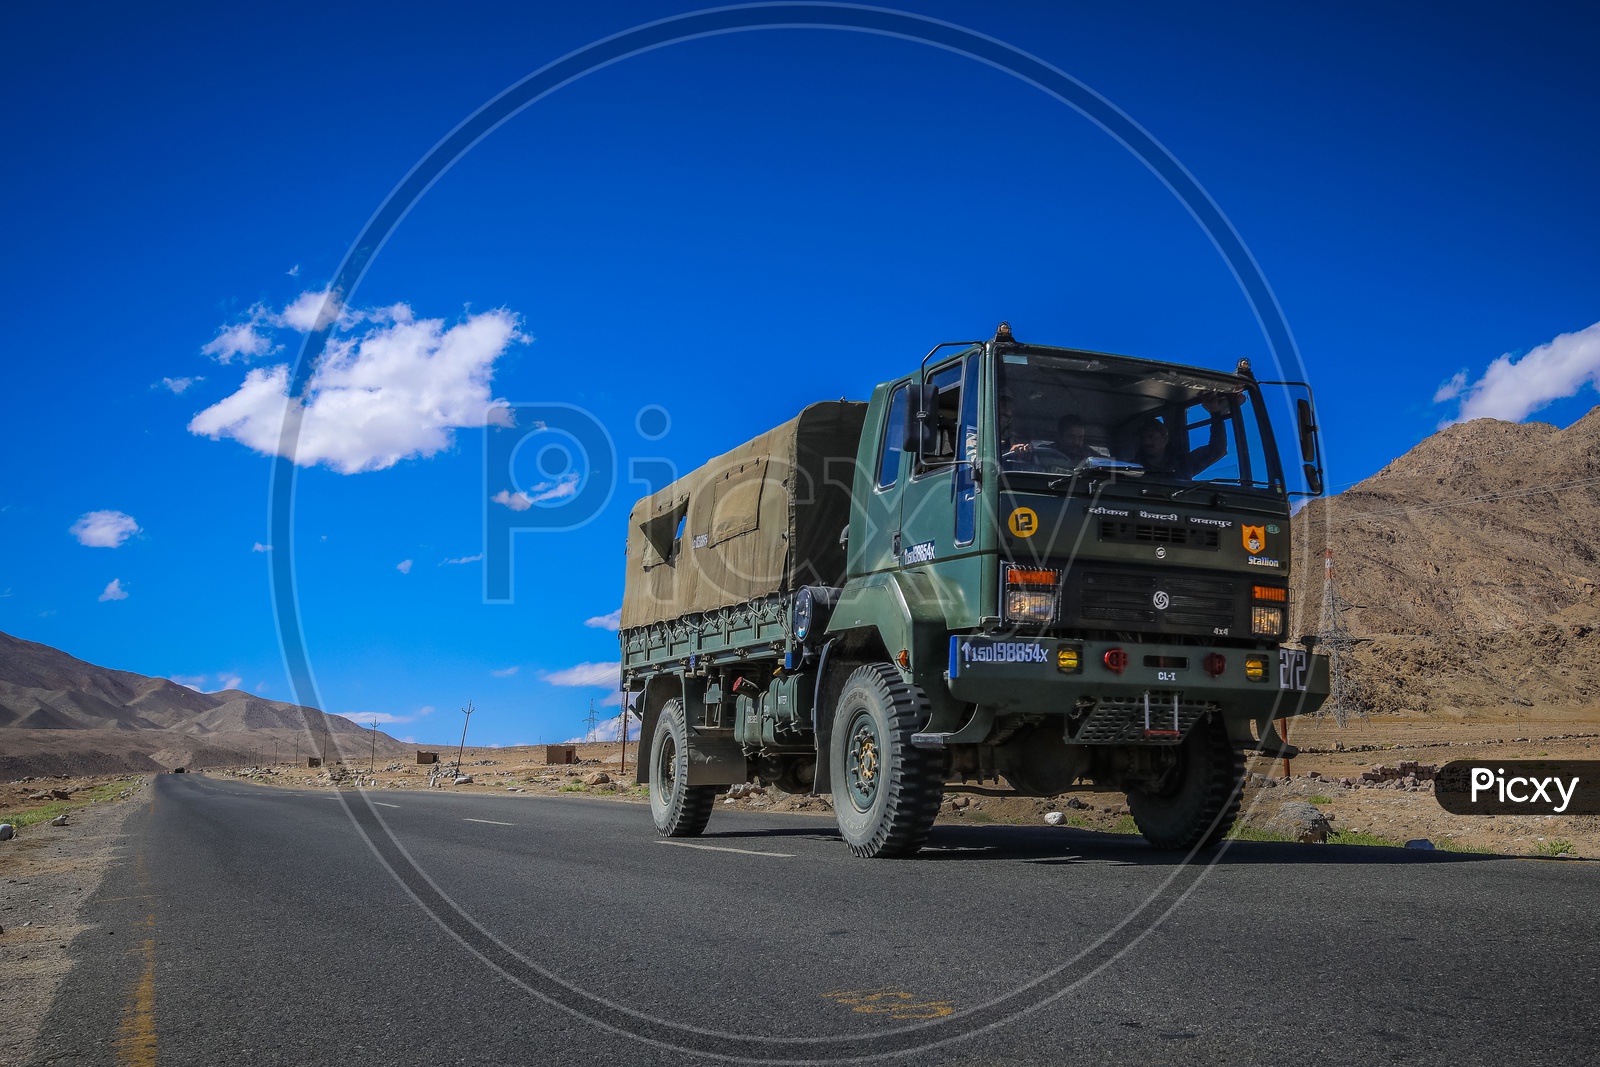 Military van of leh roads with mountains in the background